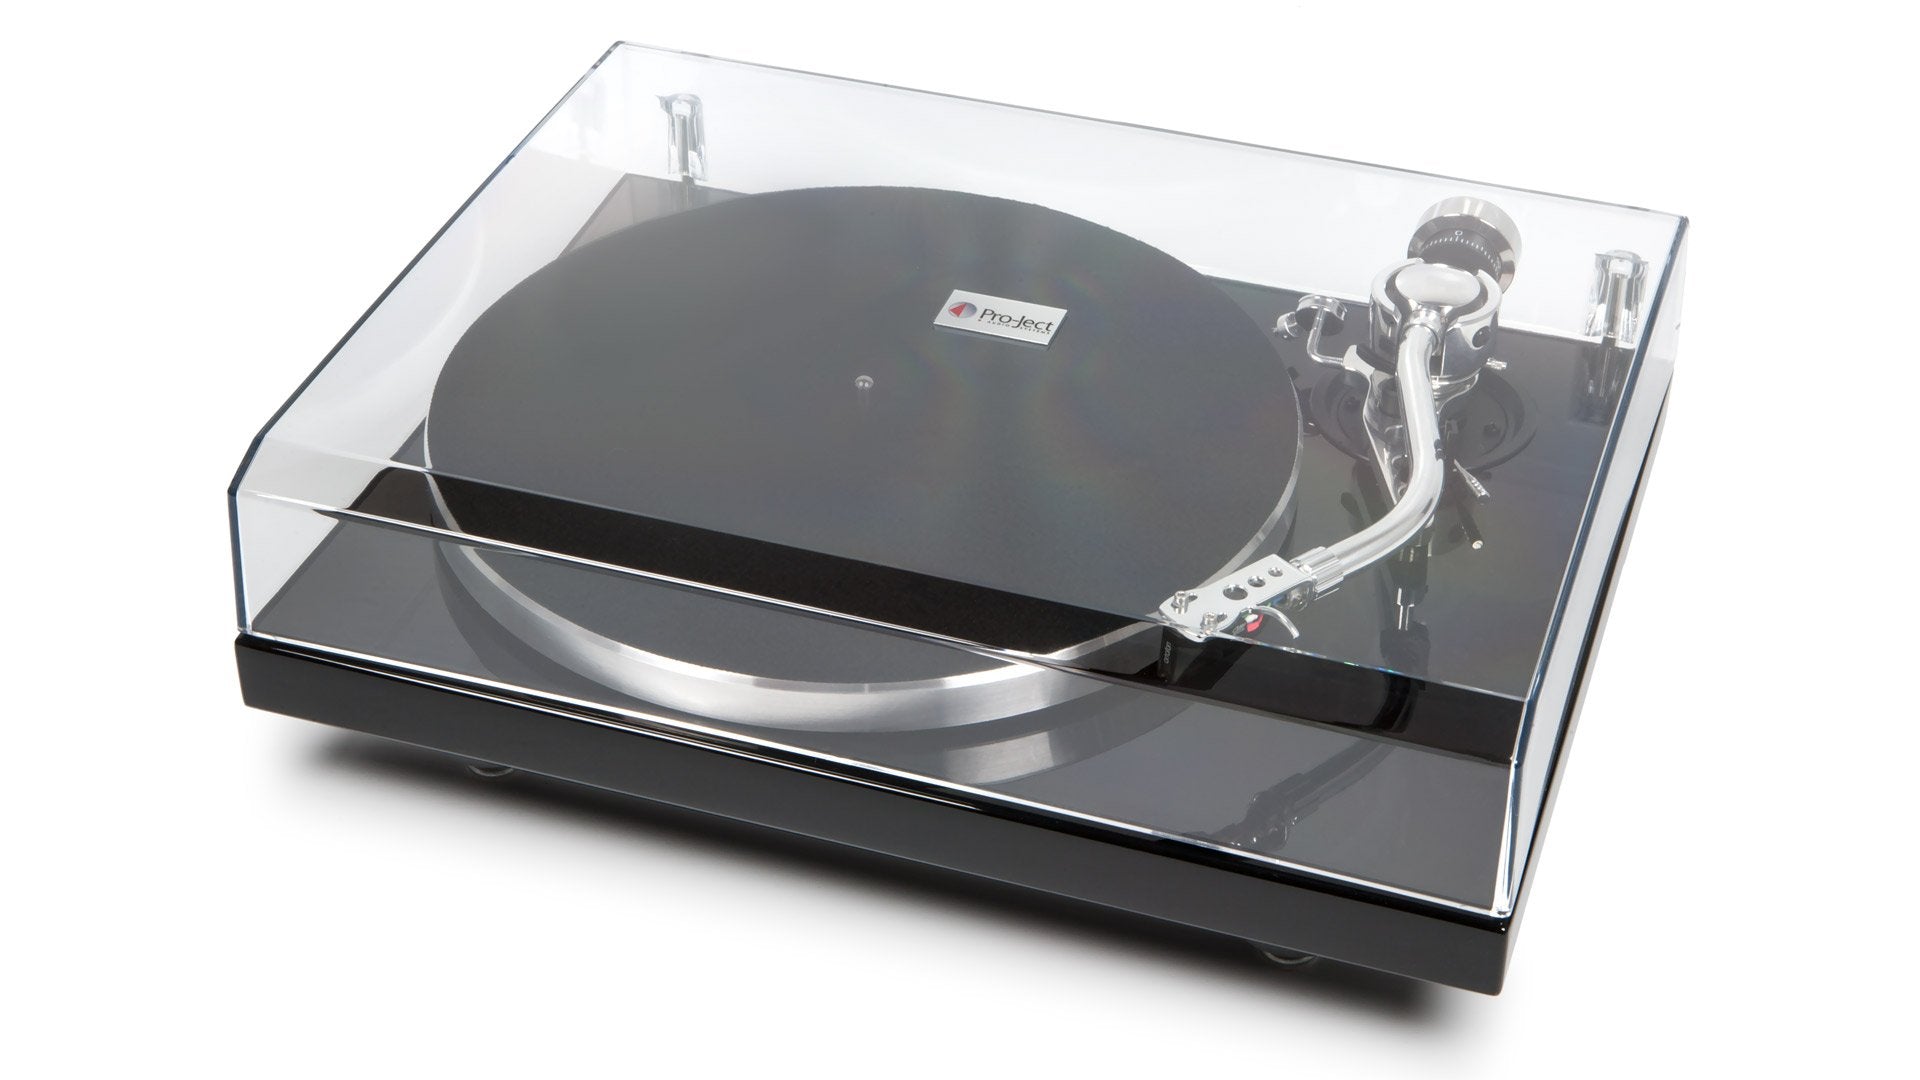 Pro-Ject 1Xpression Classic S-Shaped Turntable | Turntables | Paragon Sight & Sound